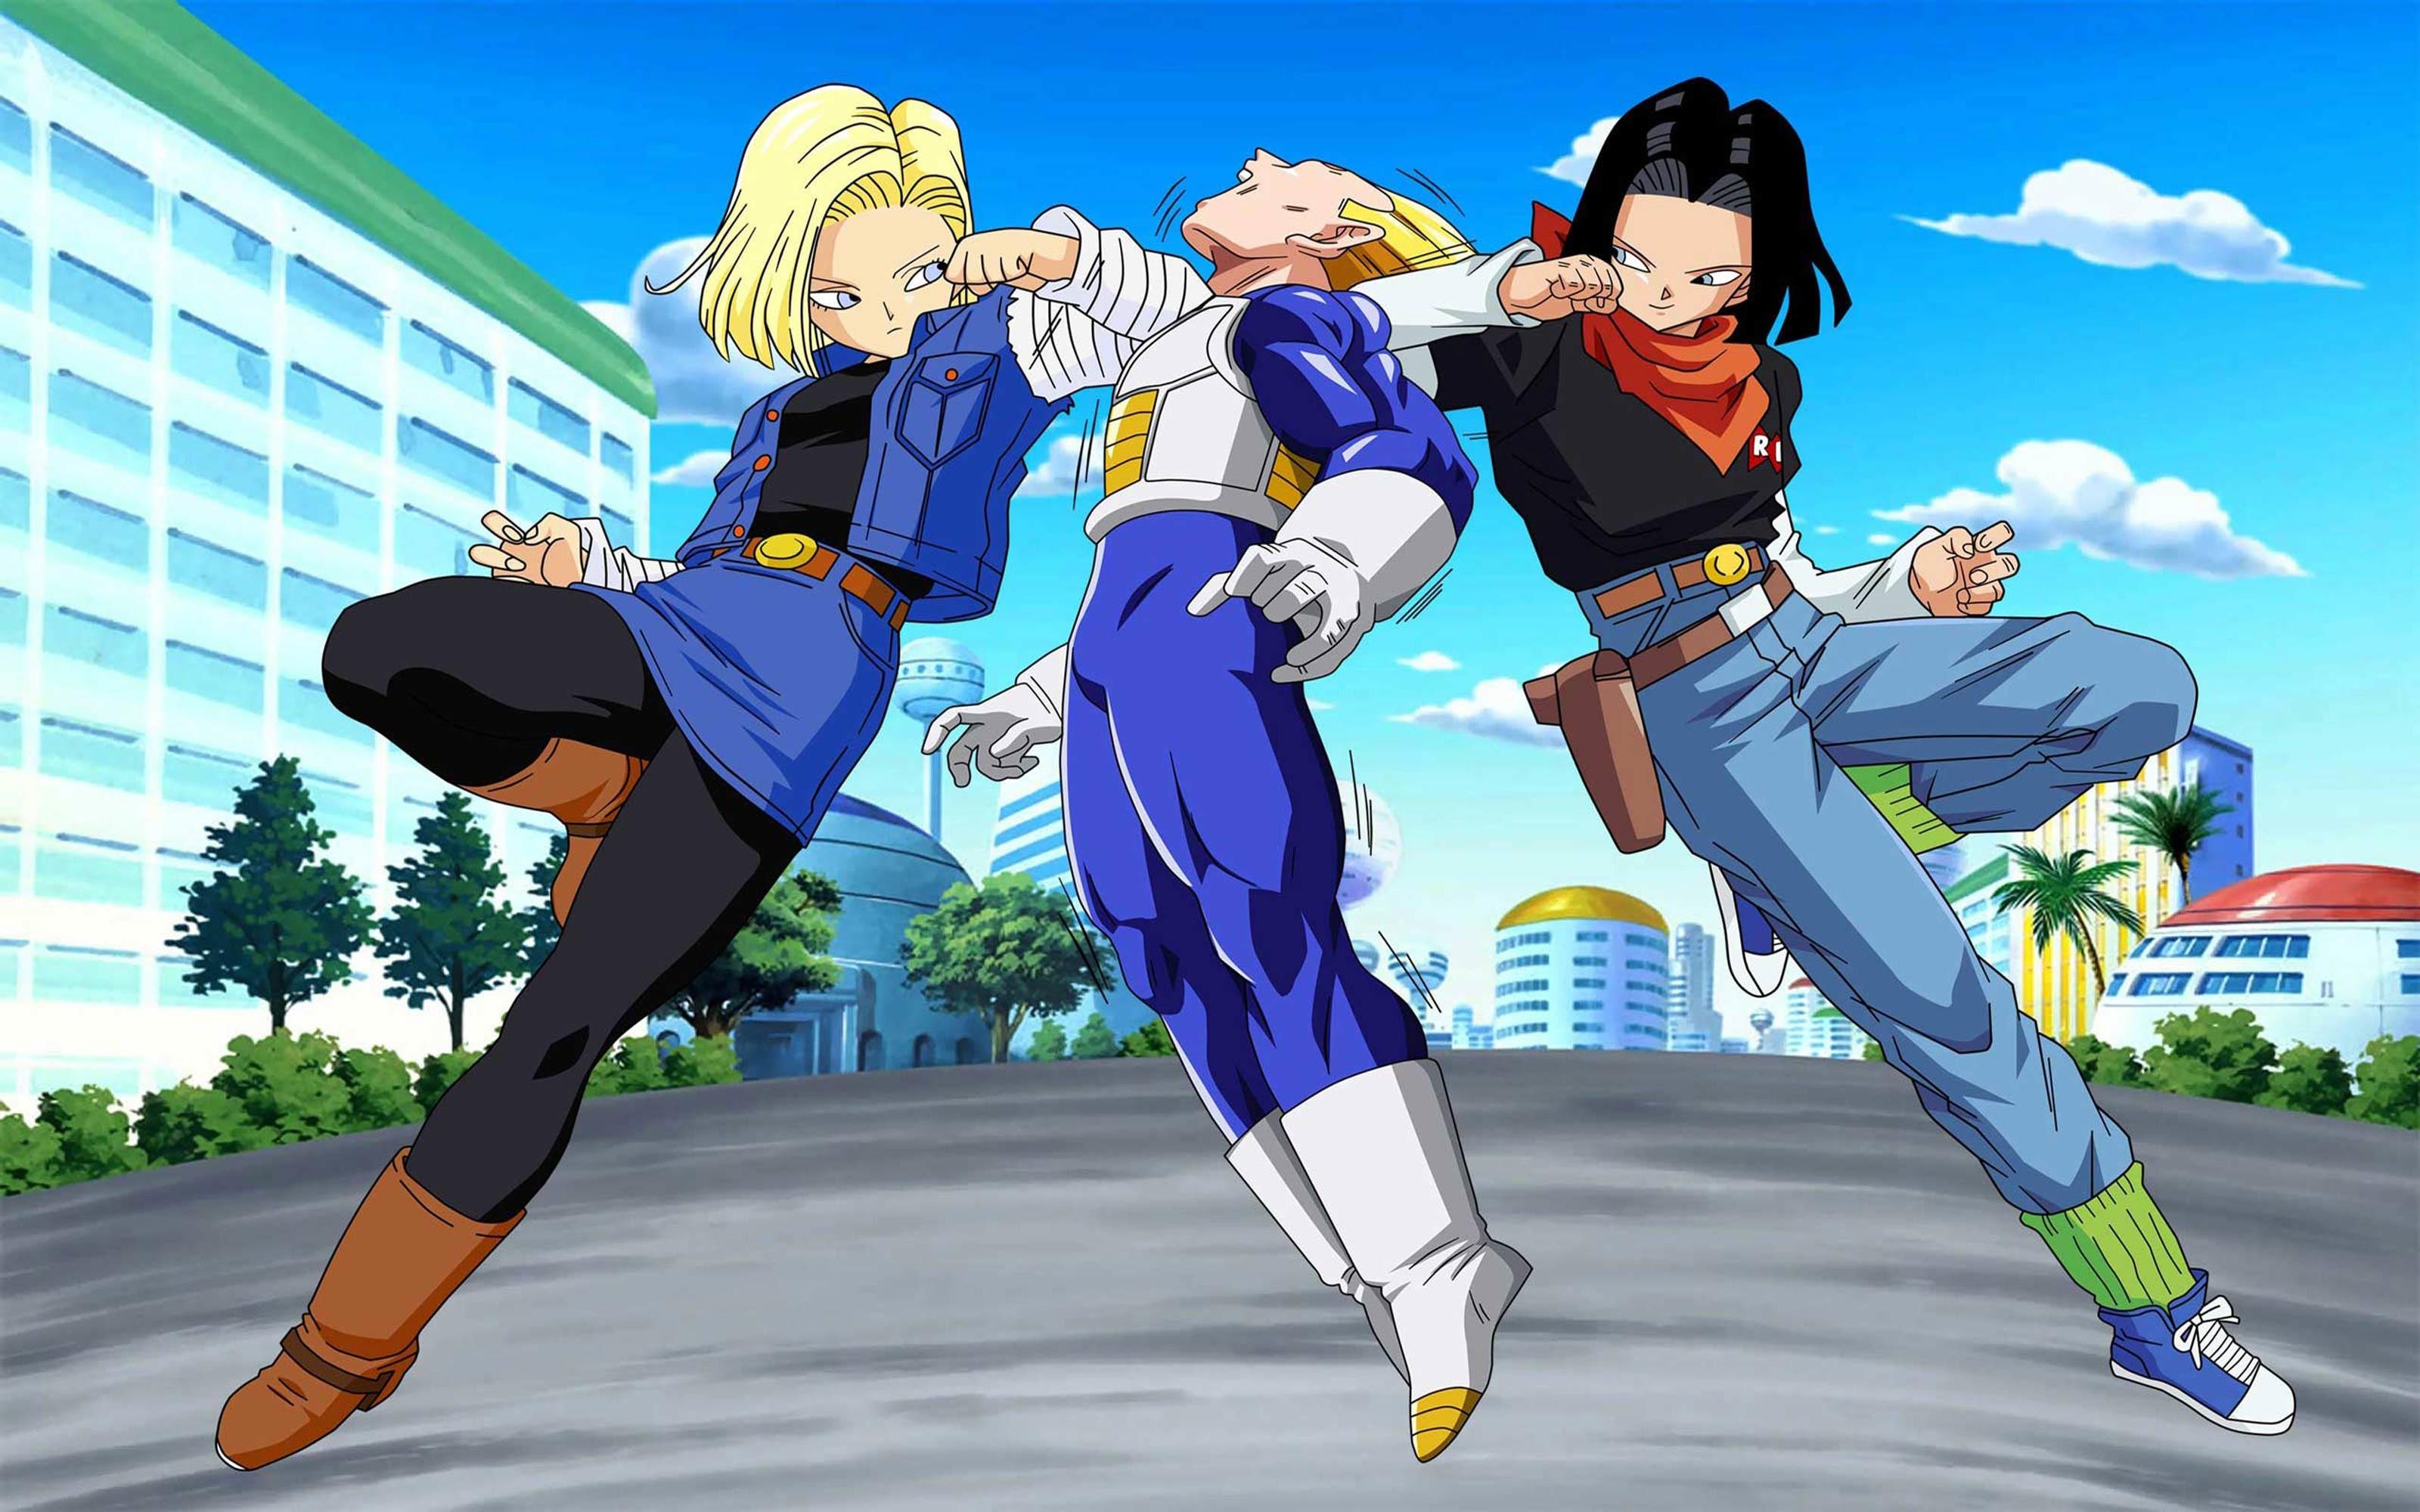 Android 18 And Trunks Wallpapers - Wallpaper Cave